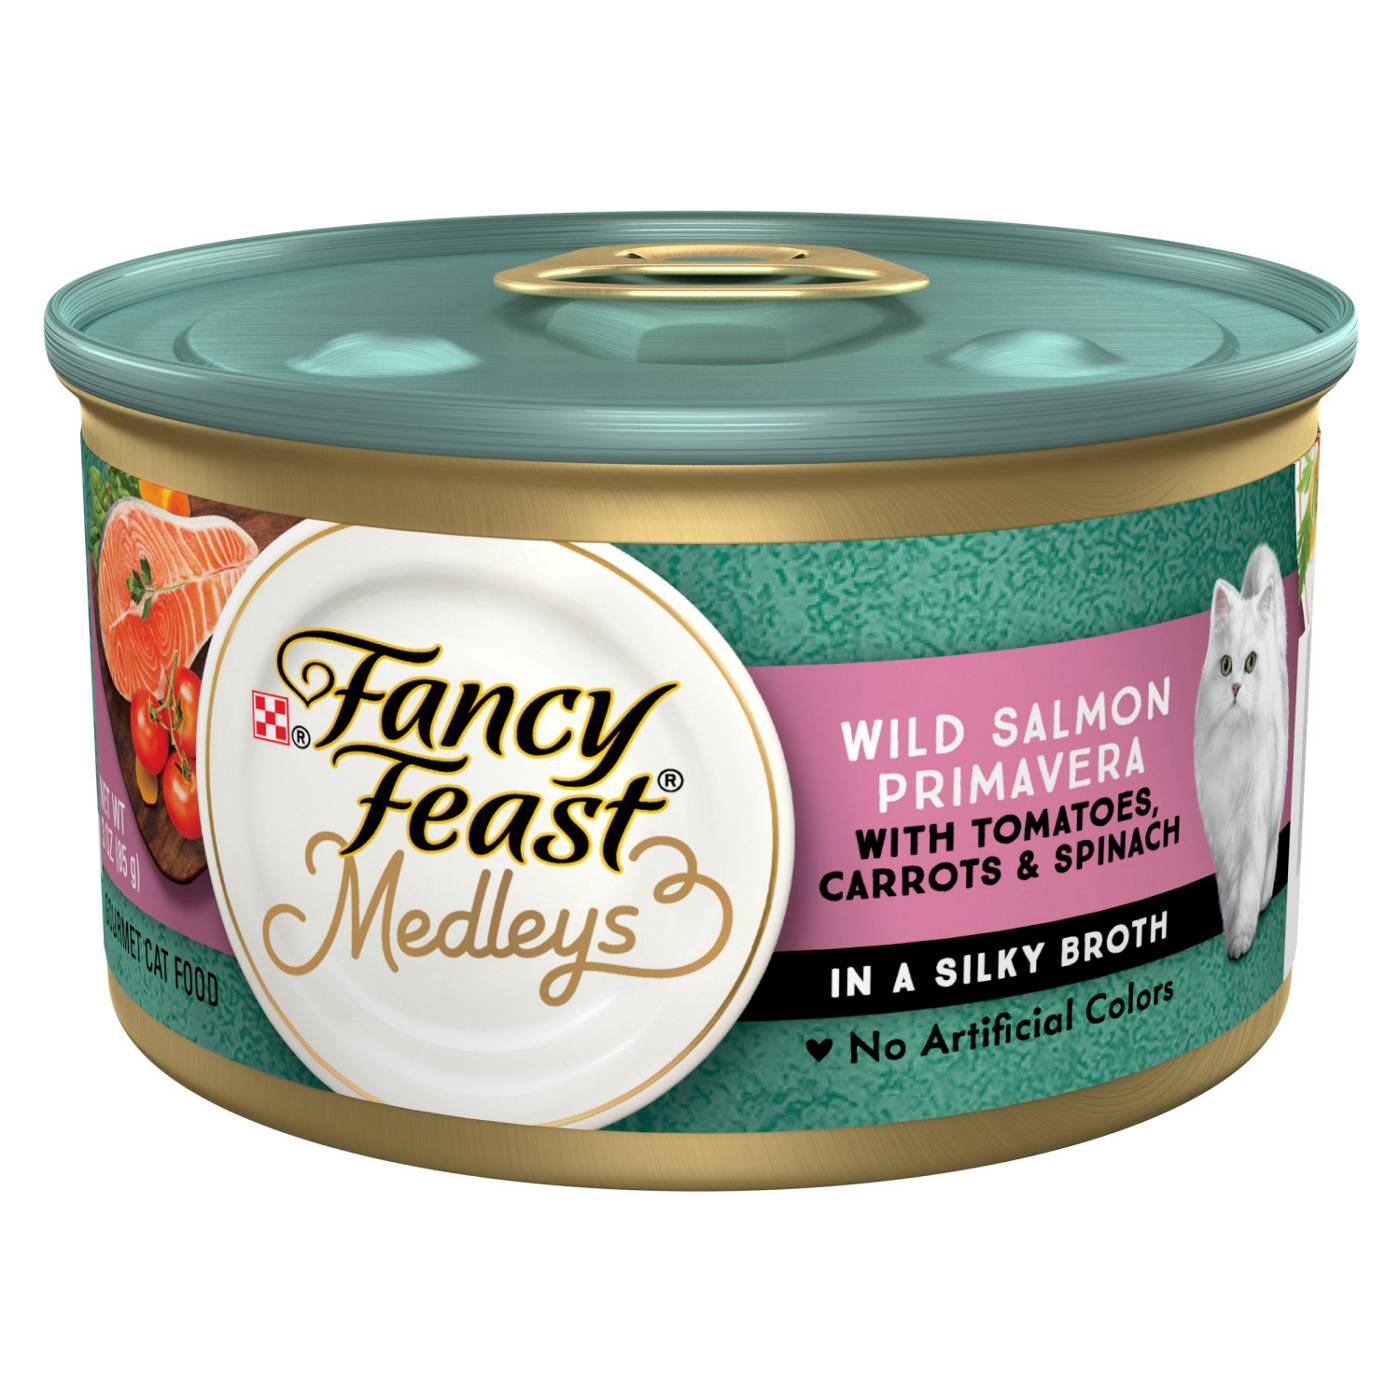 Fancy Feast Purina Fancy Feast Wet Cat Food Medleys Wild Salmon Primavera With Tomatoes Carrots and Spinach in Silky Broth; image 1 of 5